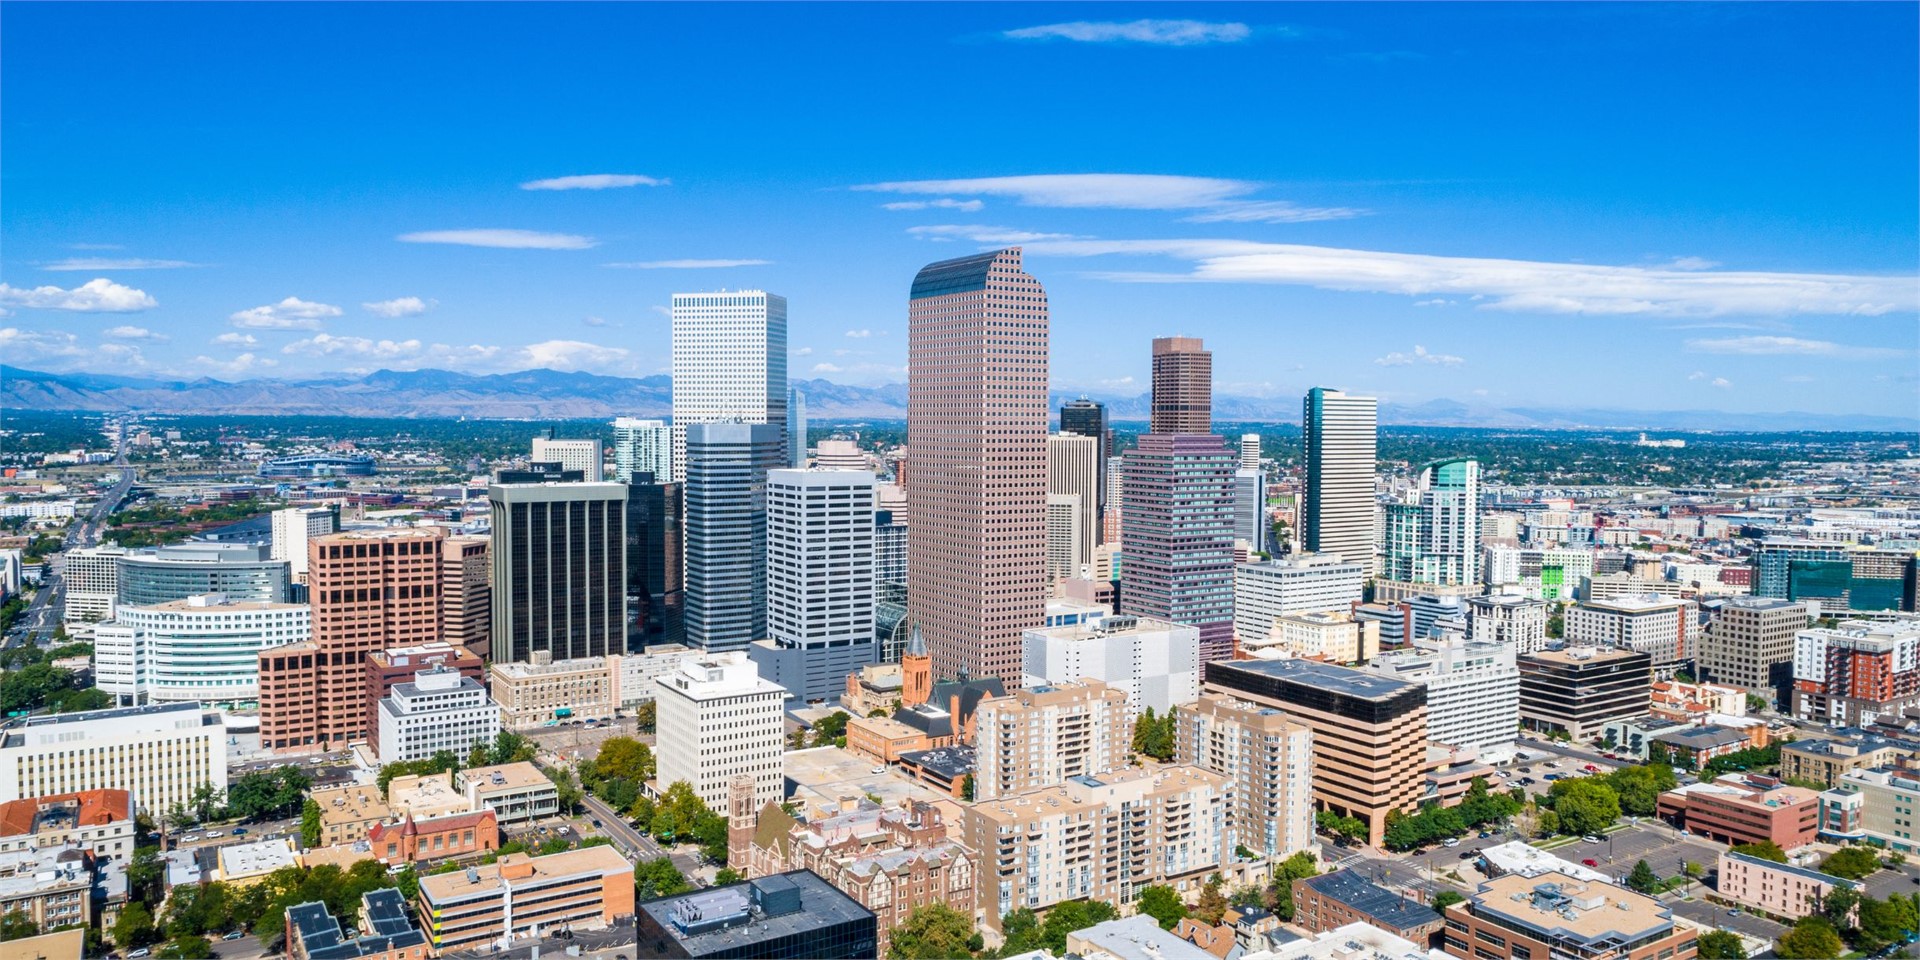 Hotels and accommodation in Denver, USA
